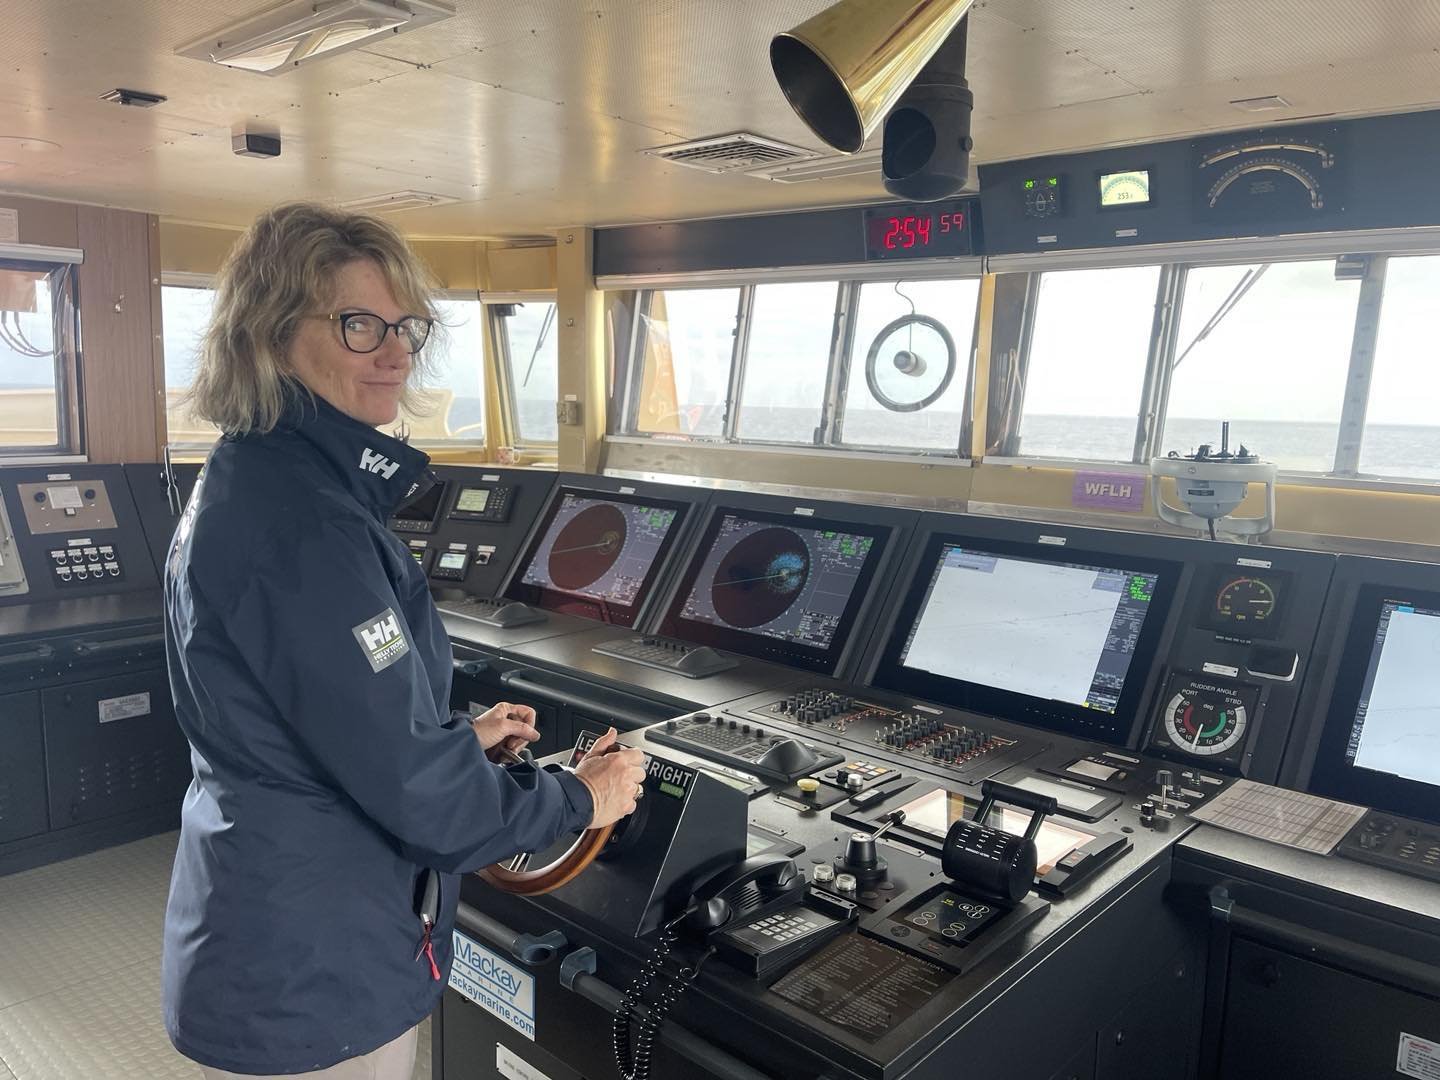 I got to &ldquo;drive the bus&rdquo; so to speak. Out in the middle of the Pacific Ocean, I learned how to steer a container ship.  Super cool!  Kinda scary to be in charge of such a large moving object. #containership #supercool #pacificocean @pacif